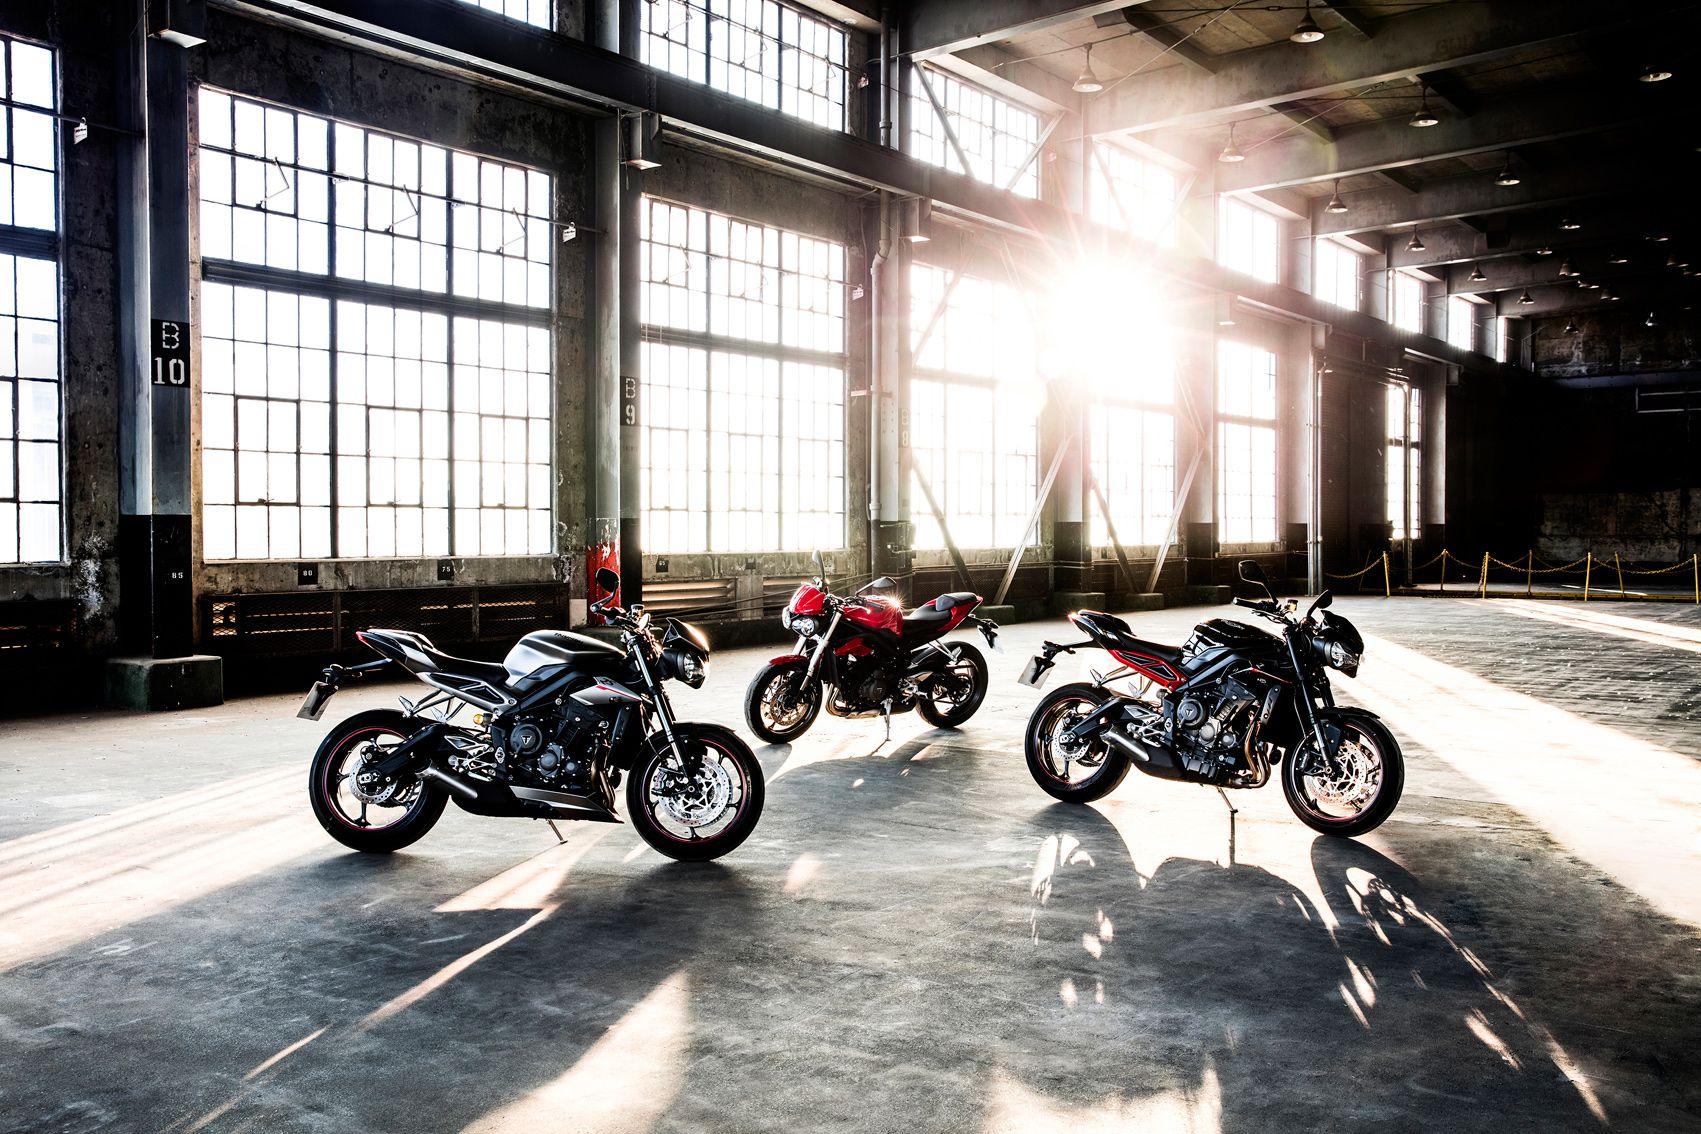 The new Street Triple Line-Up